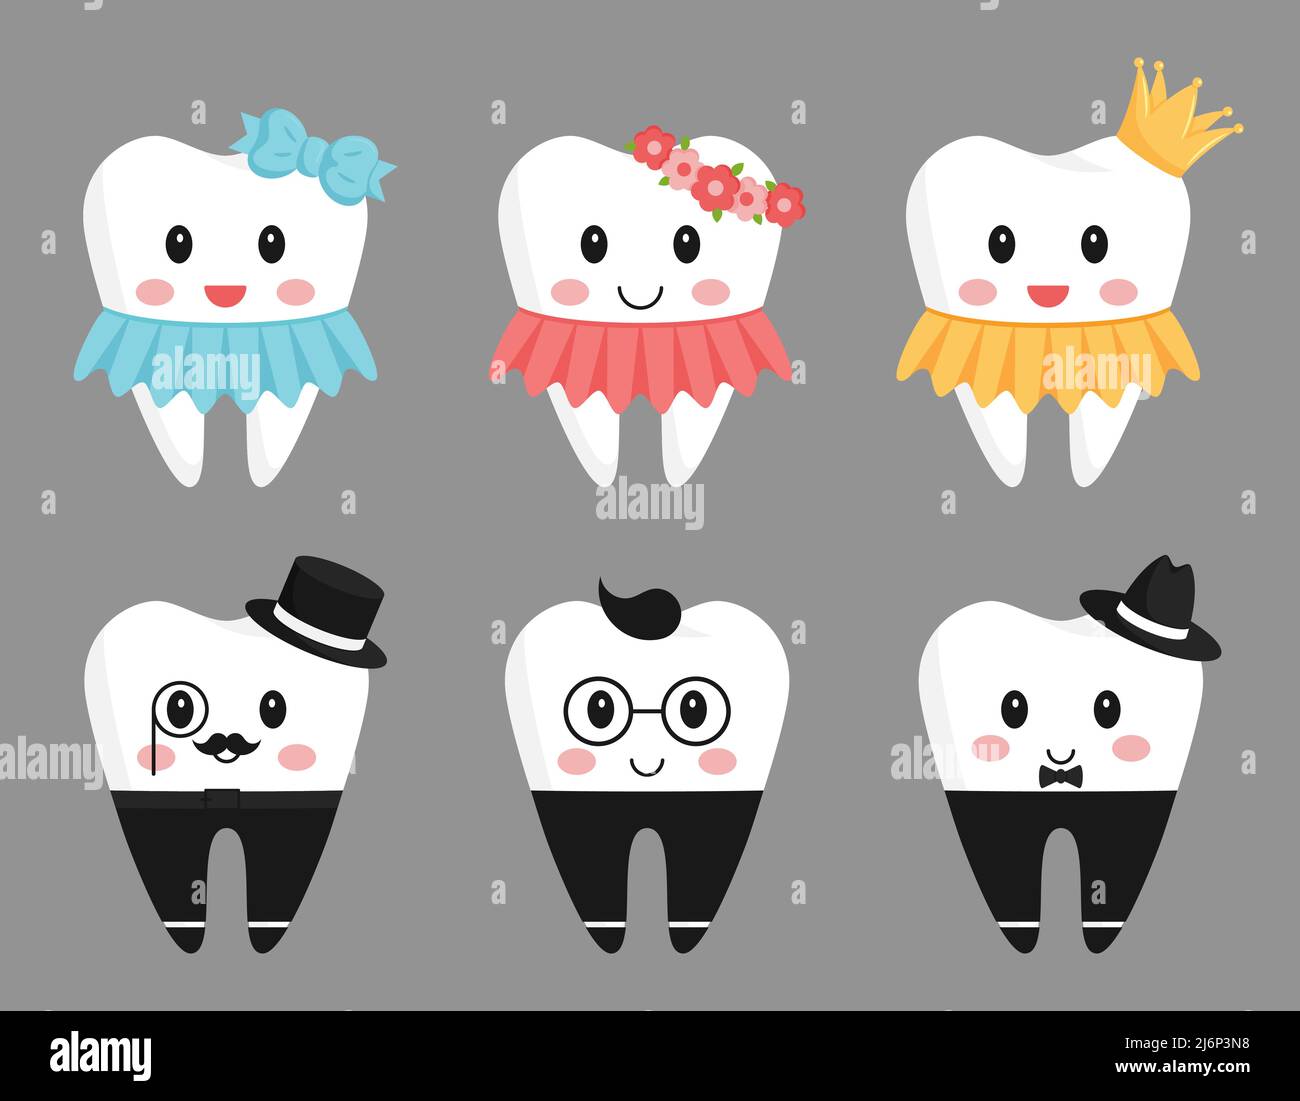 Set of 6 teeth characters. Girls in a dress and with a wreath, crown and bow. Boys with glasses and hats. The design elements in funny cartoon style.P Stock Vector